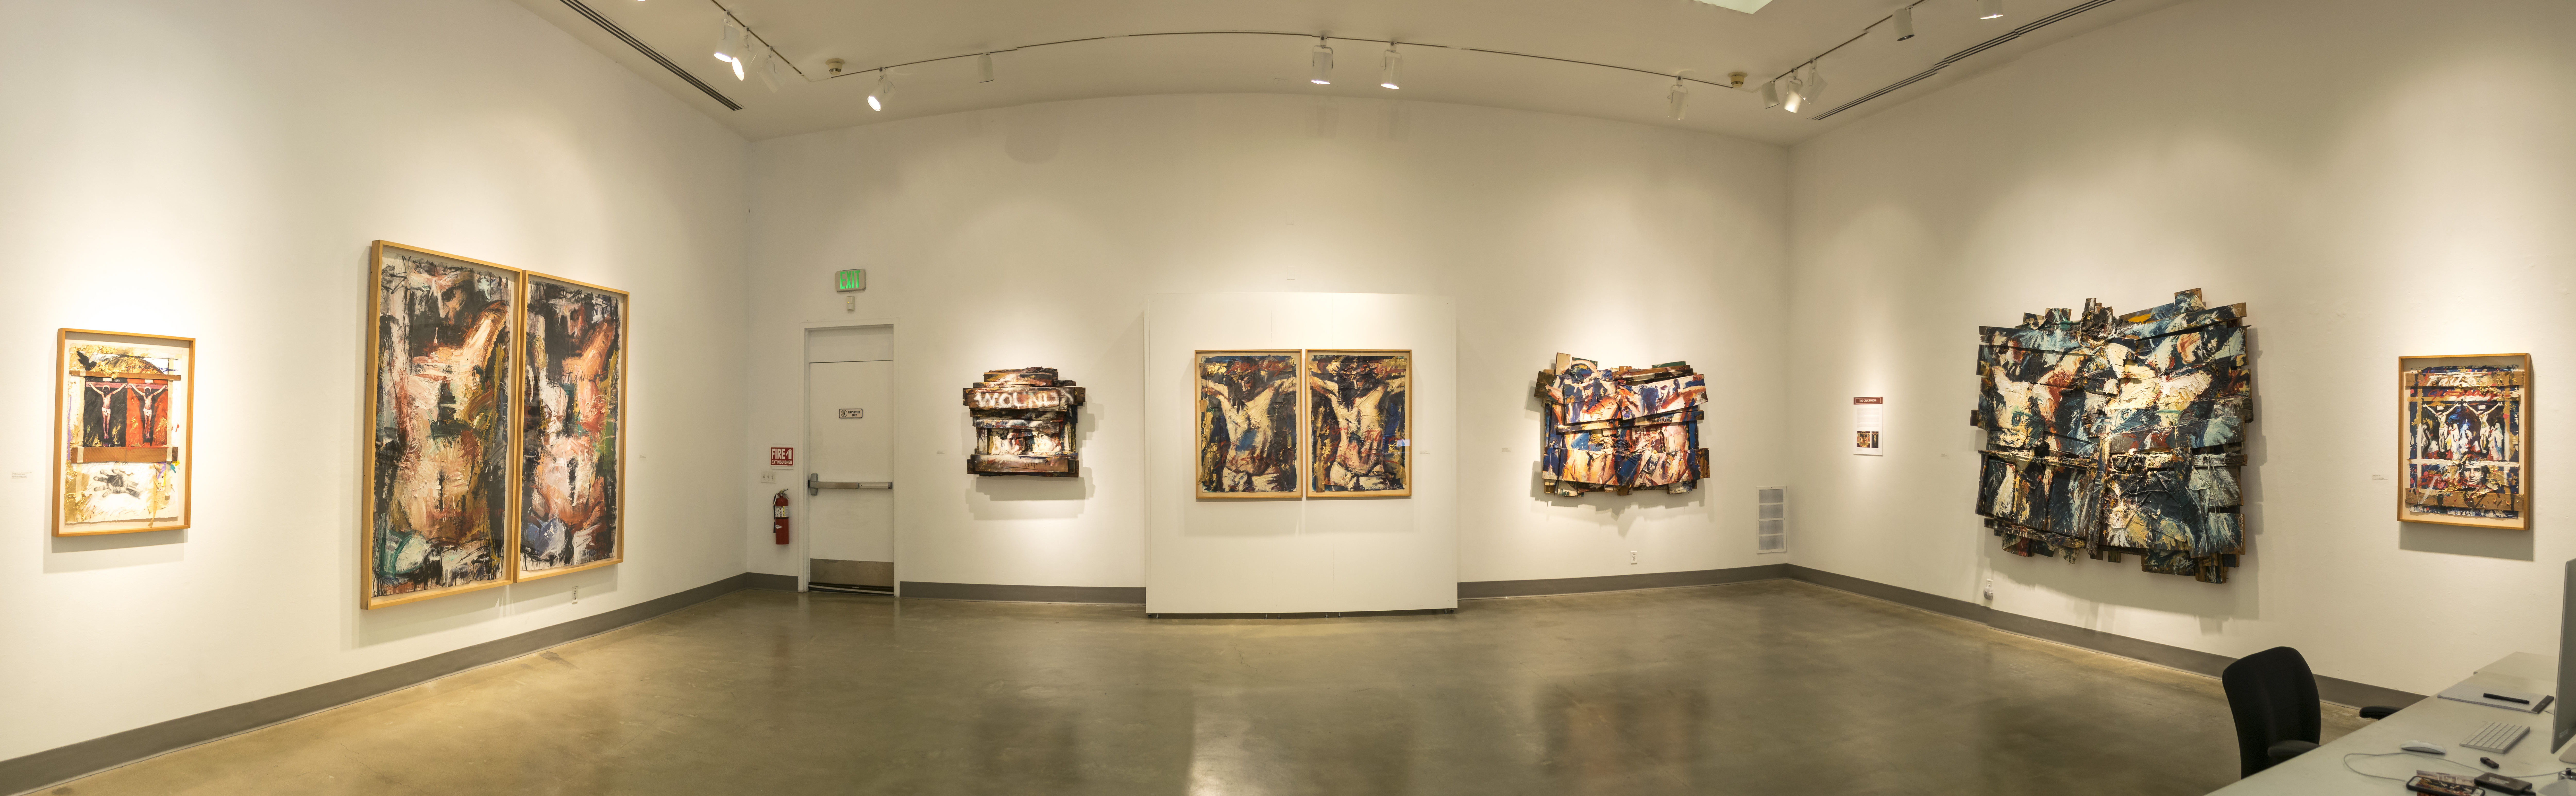 Westside of front gallery, Exhibition: Jim Morphesis: Passion and Presence, Memento and Myth, Nov 18, 2017 - Feb 1, 2018, Curator: Michele Cairella Fillmore, W. Keith & Janet Kellogg Art Gallery, Cal Poly Pomona. [Panoramic of the North gallery]